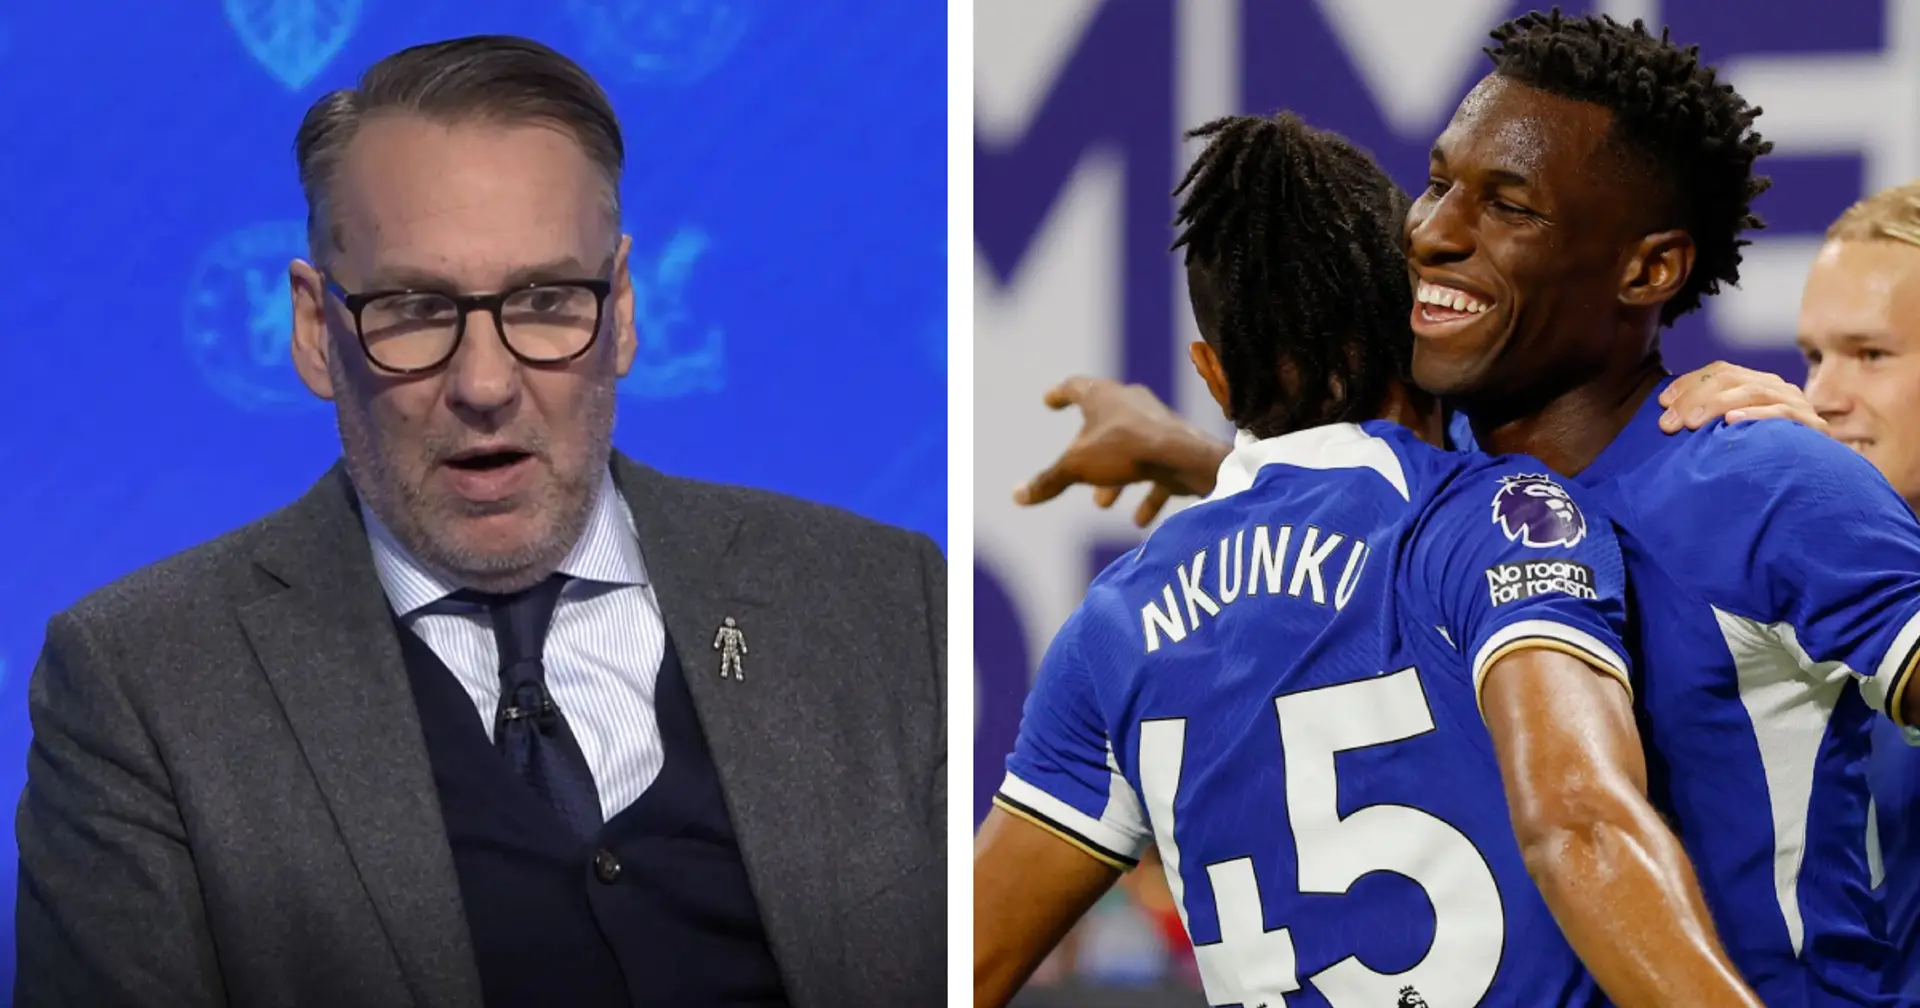 Jackson and Nkunku can't win Golden Boot this season — Paul Merson explains why